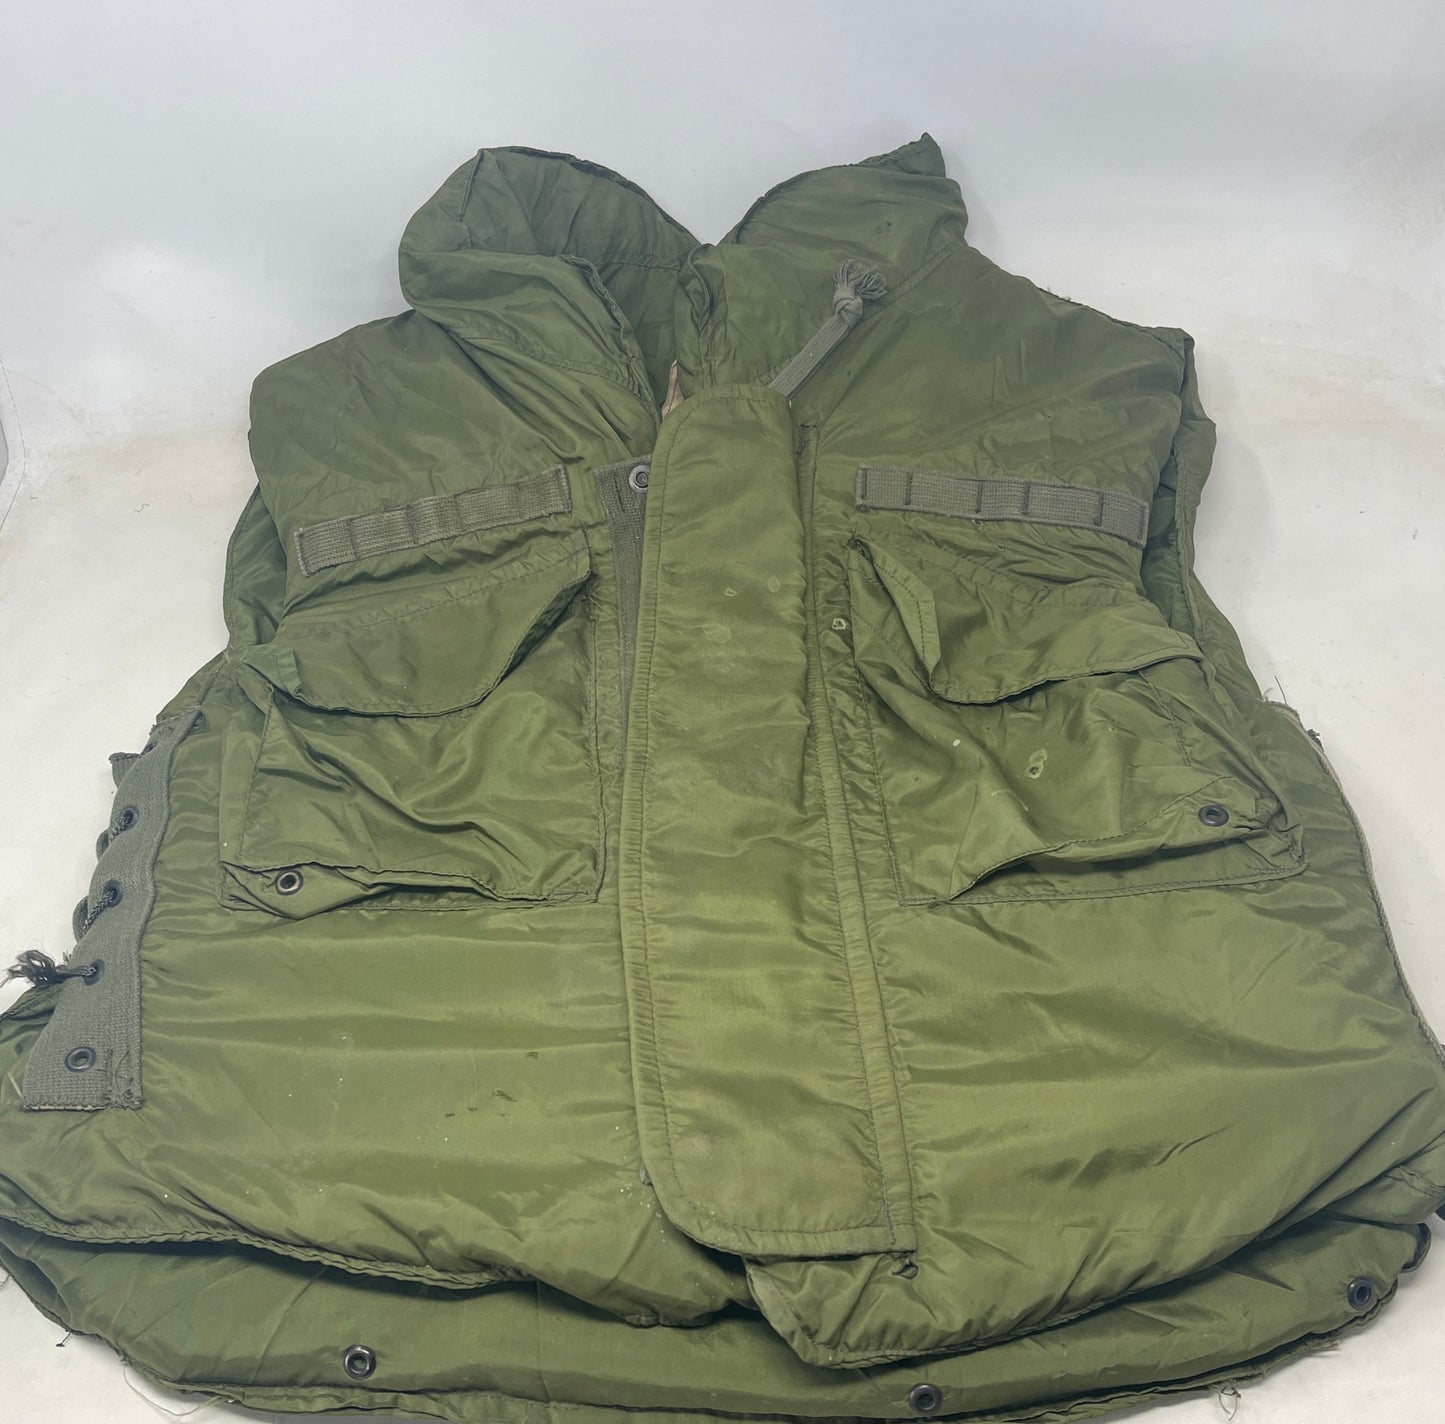 Armor Body Fragmentation Protective Vest with 3/4 Collar M69